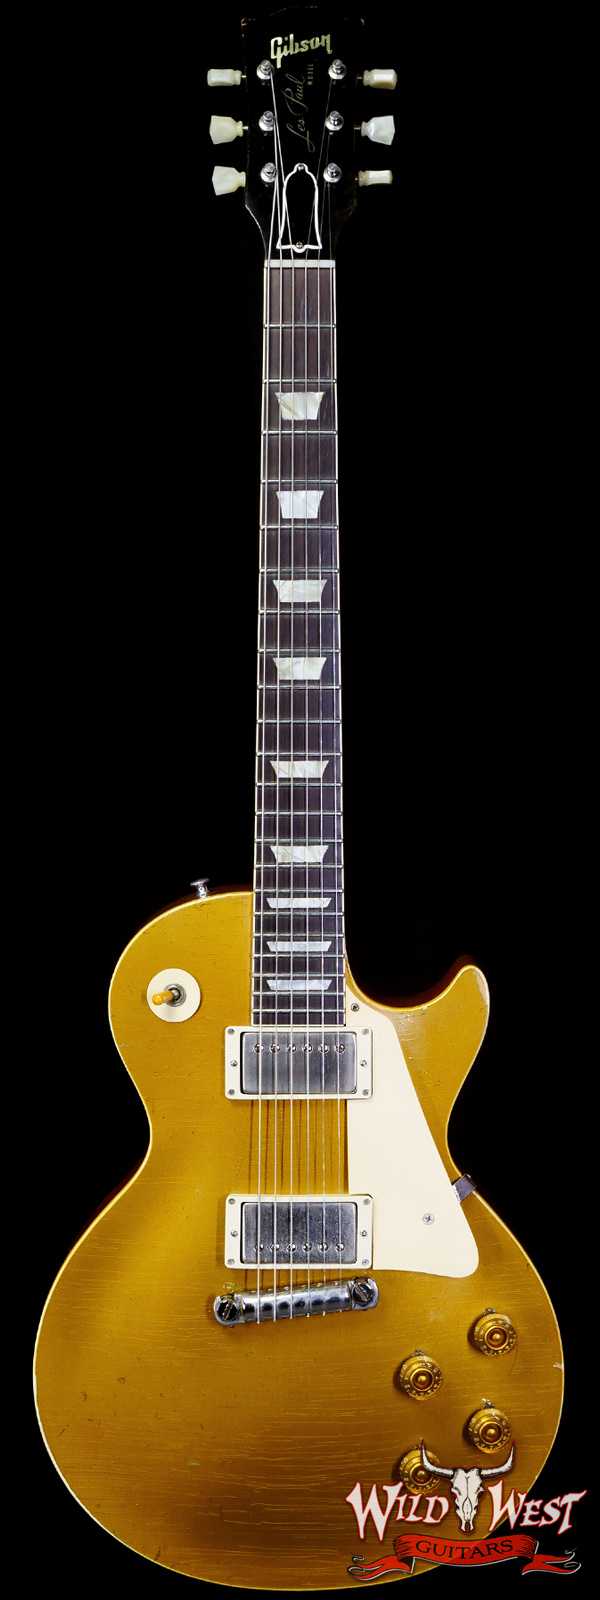 1954 Gibson Gold Top Les Paul Conversion “the EX” with 2 Original PAF Pickups owned by Joe Bonamassa